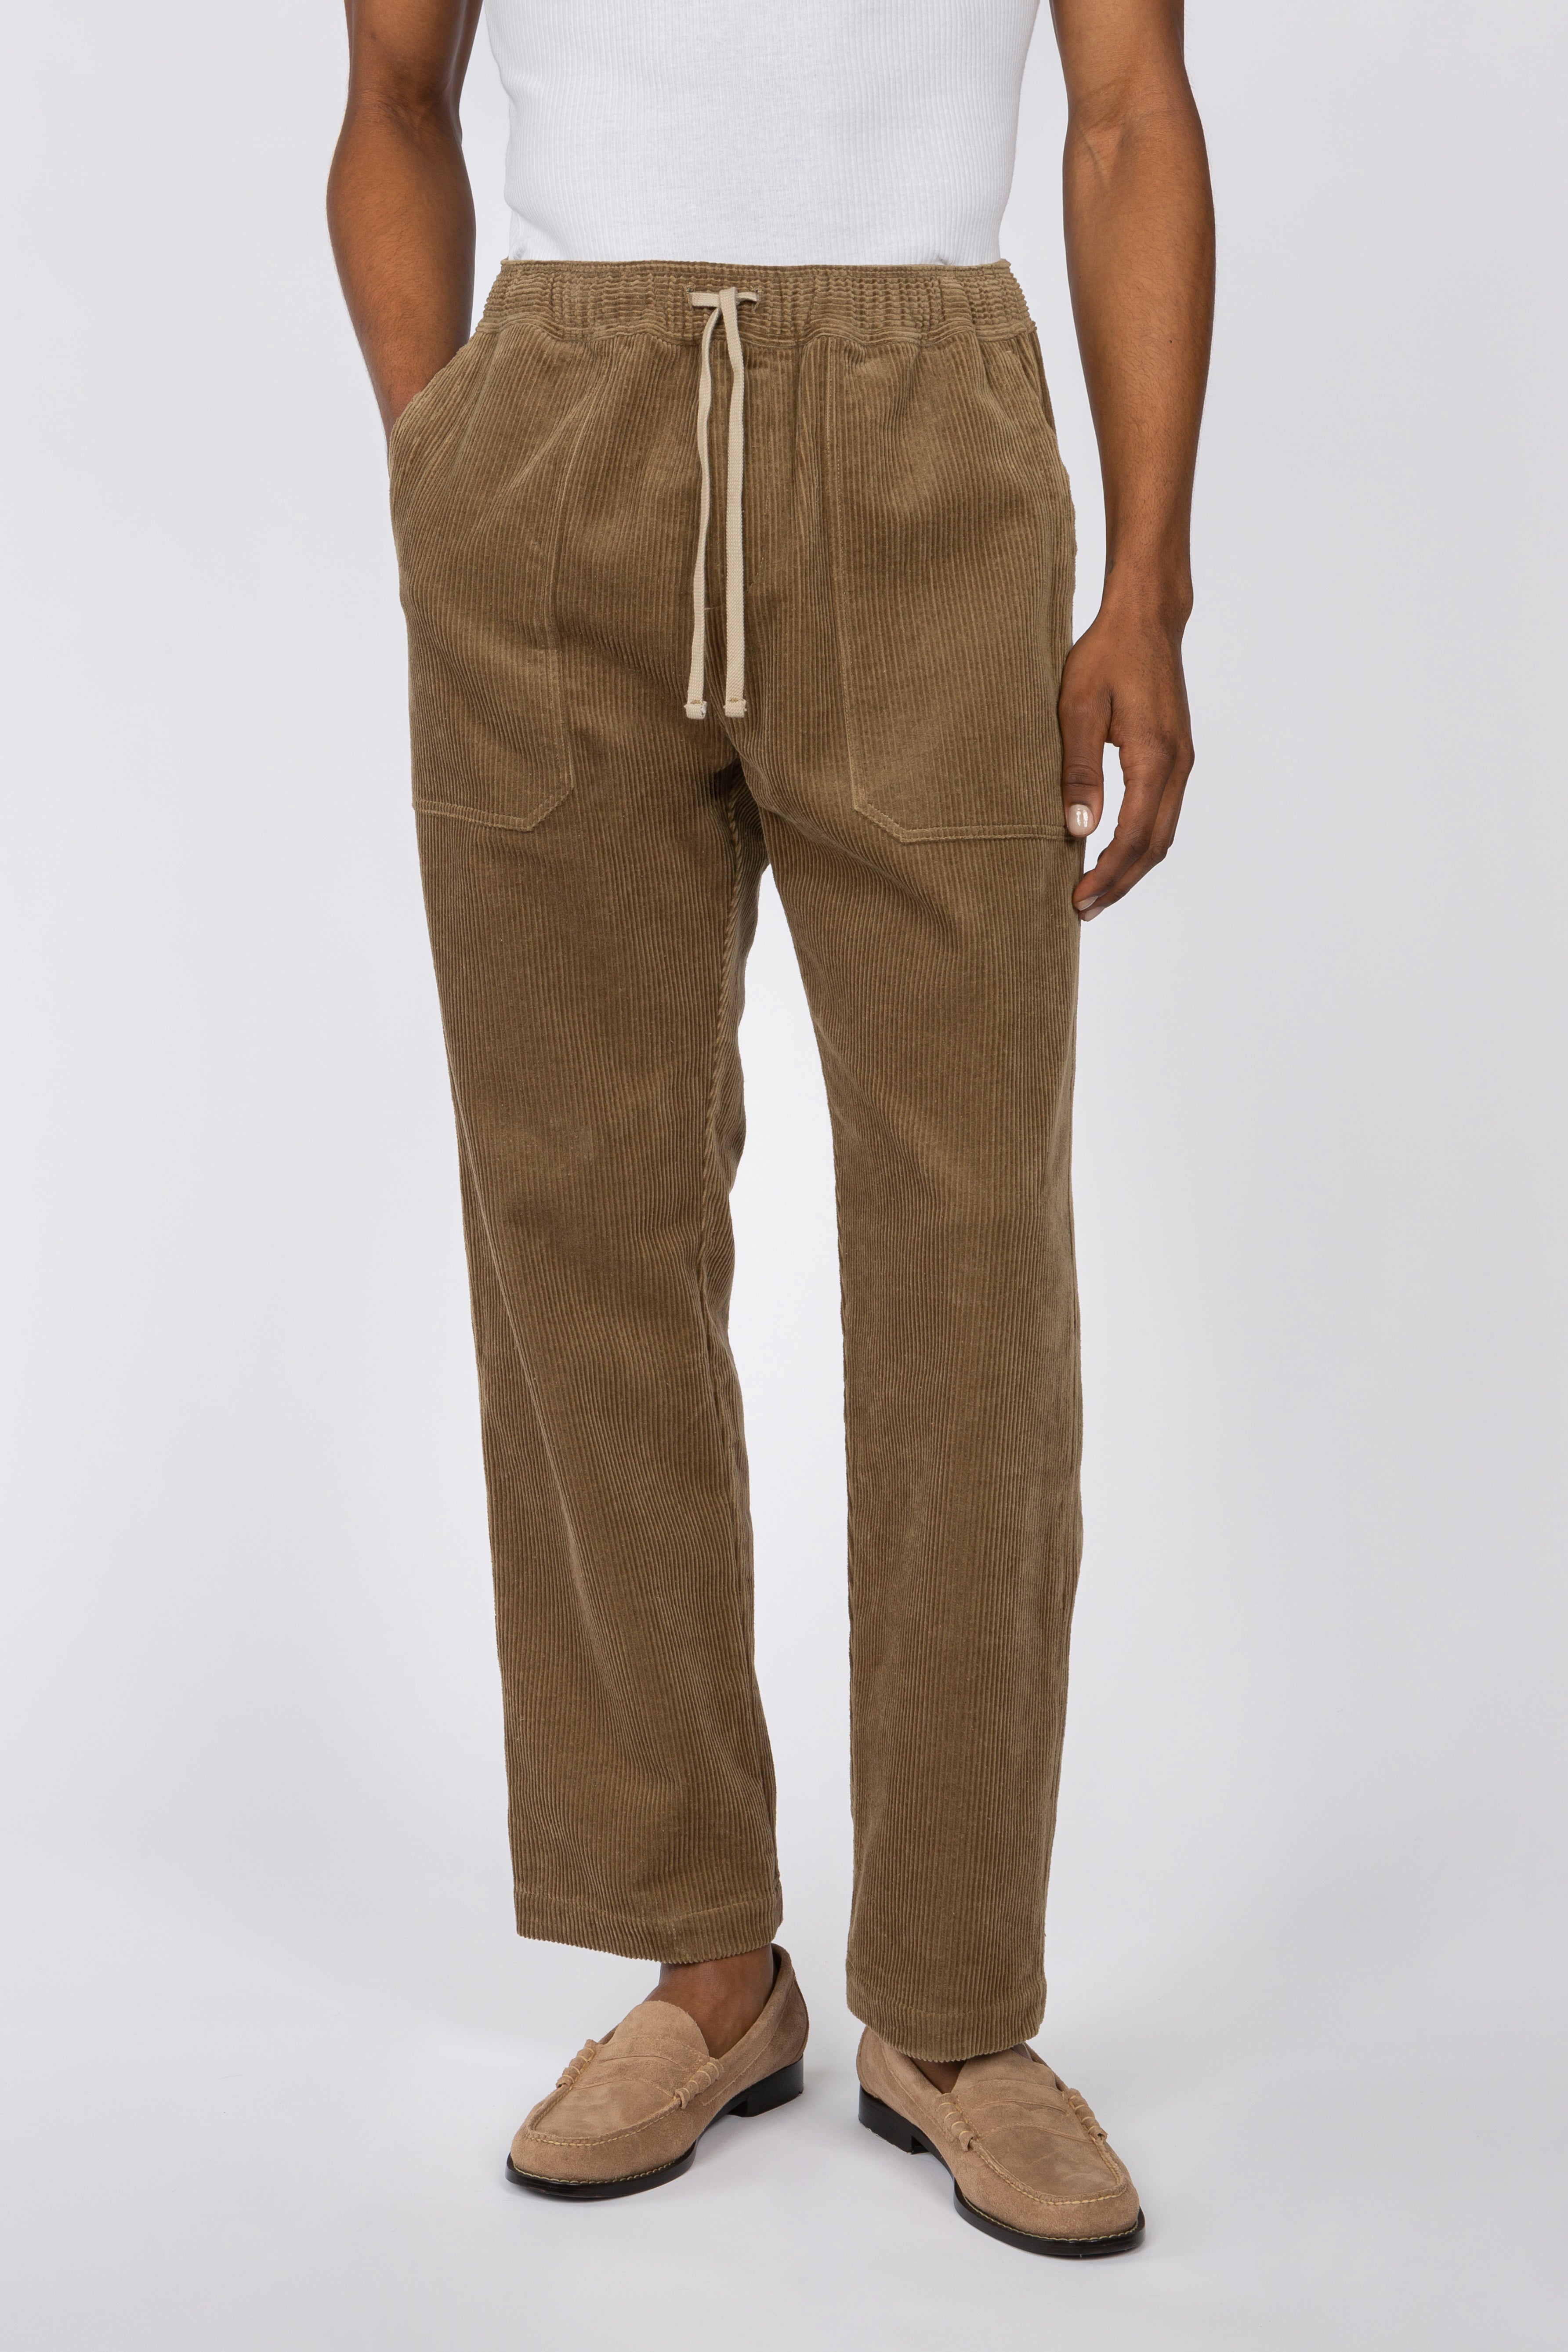 Loose Leg Easy Pant - Army Corduroy – SHADES OF GREY BY MICAH COHEN